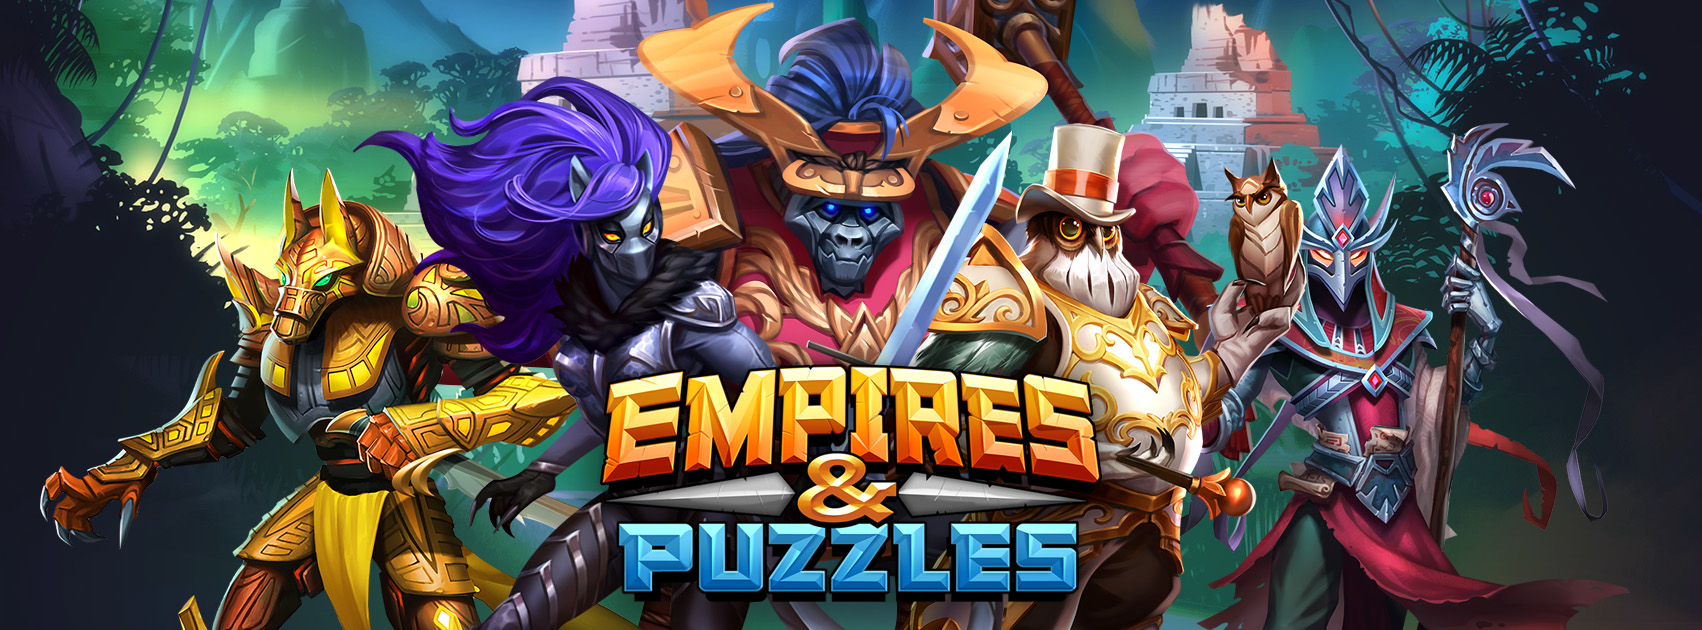 empires and puzzles hero academy 2020